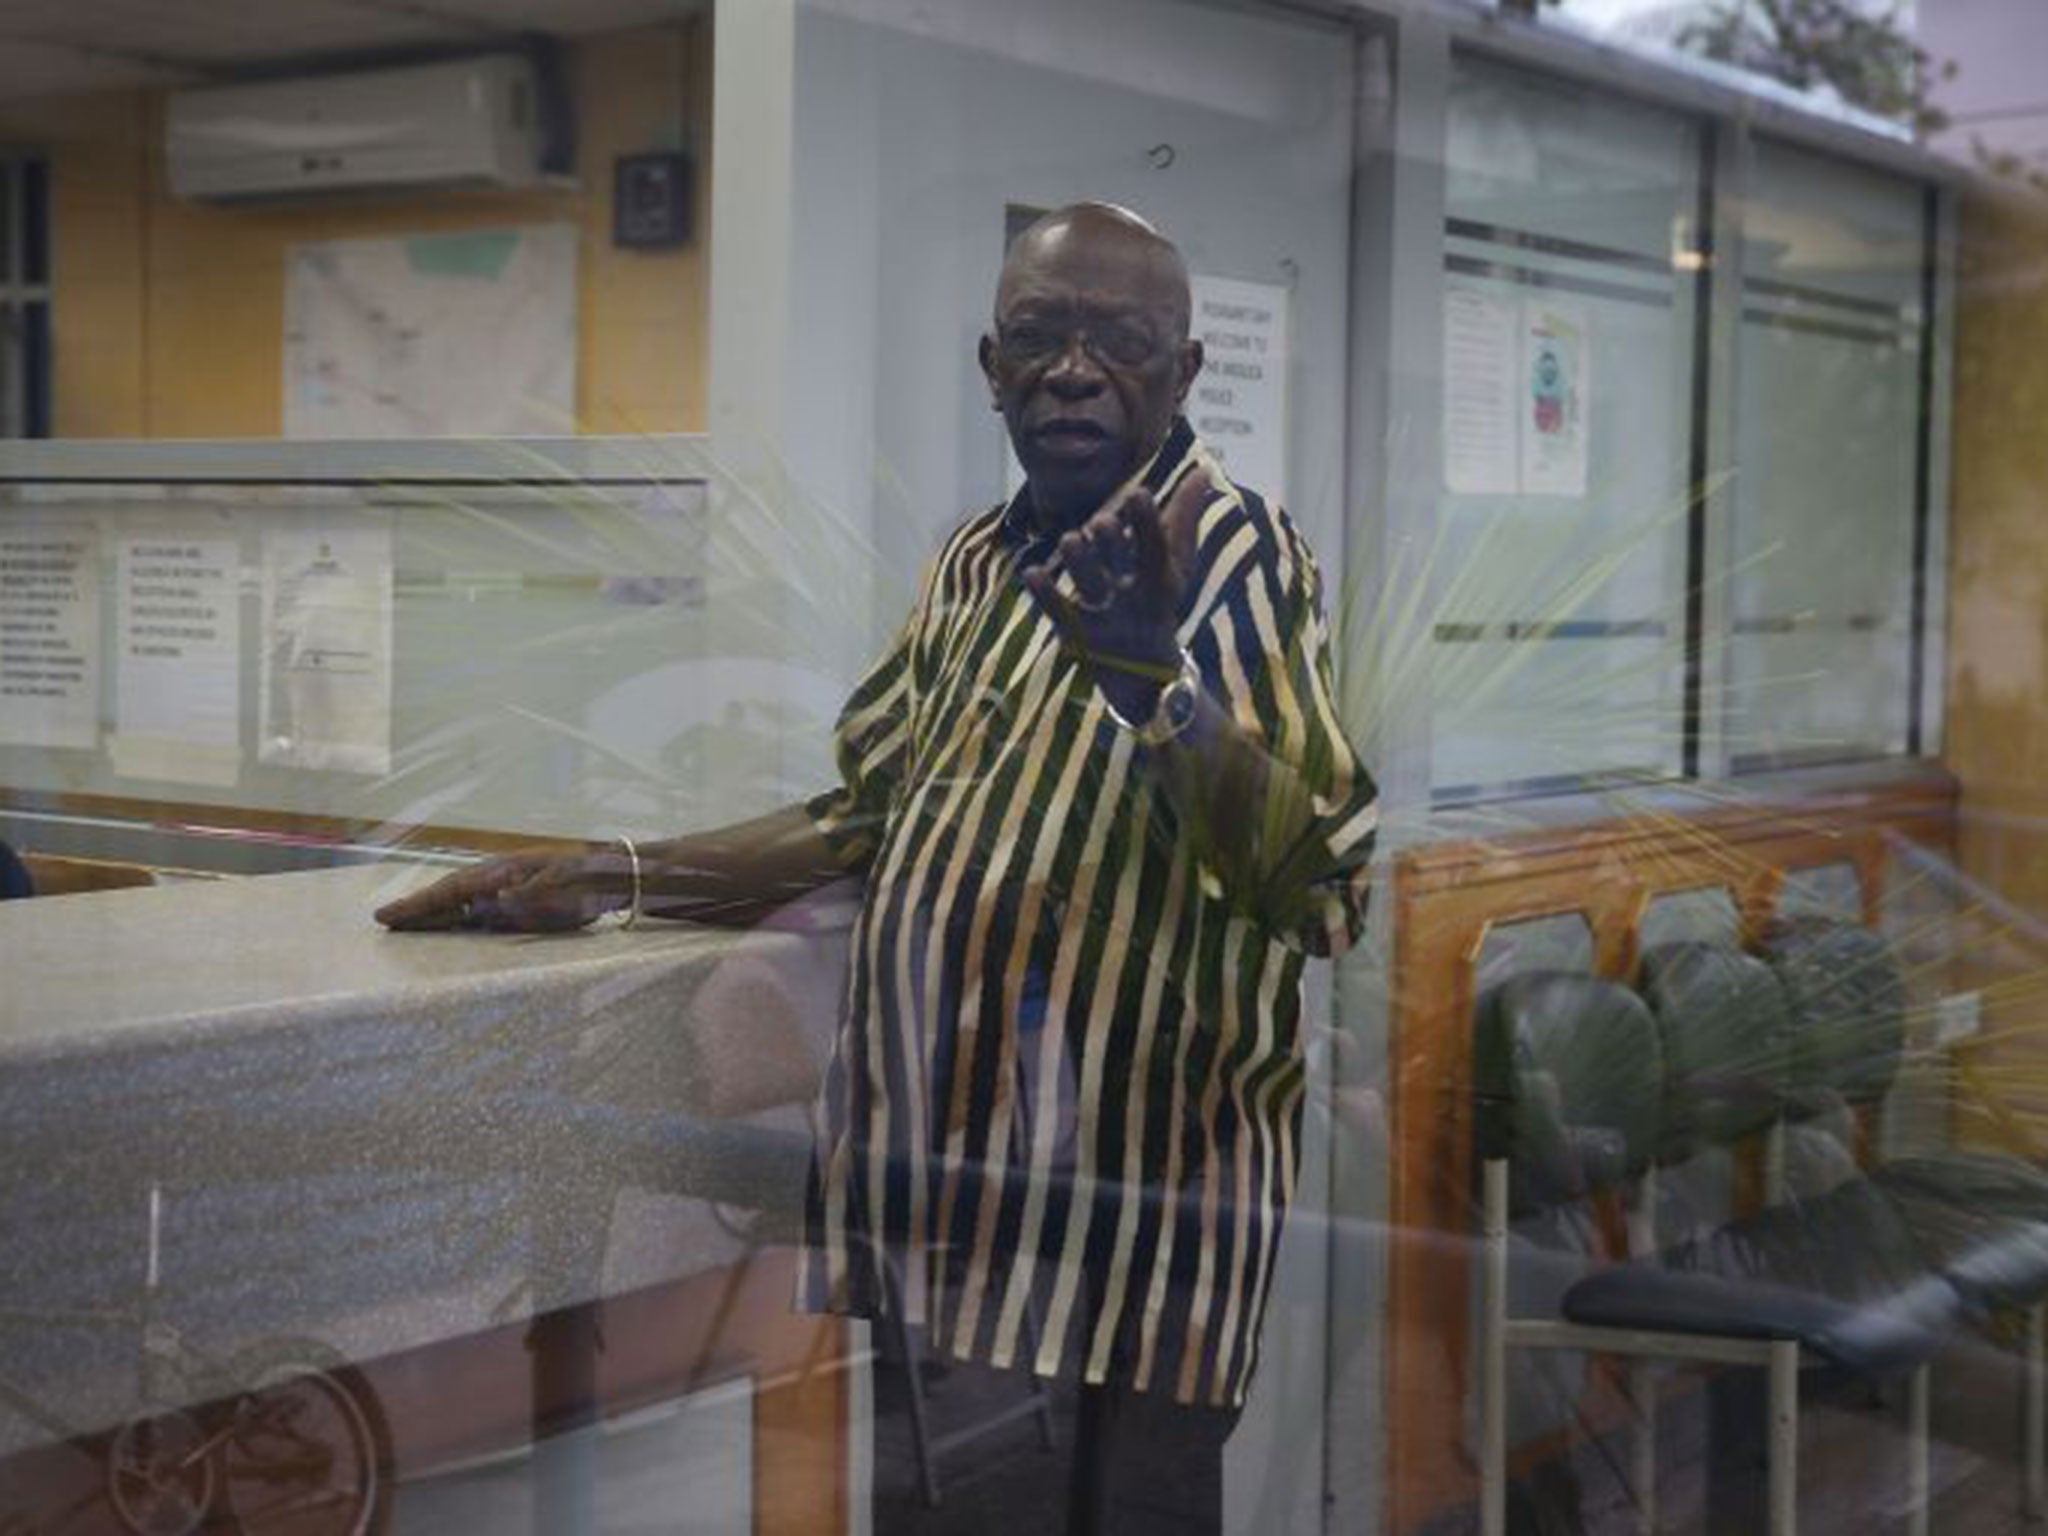 Former Fifa vice-president Jack Warner reacts to being photographed as he waits to sign in at the front desk of the Arouca Police Station as required under his bail agreement on June 11, 2015 in Arouca, Trinidad And Tobago.